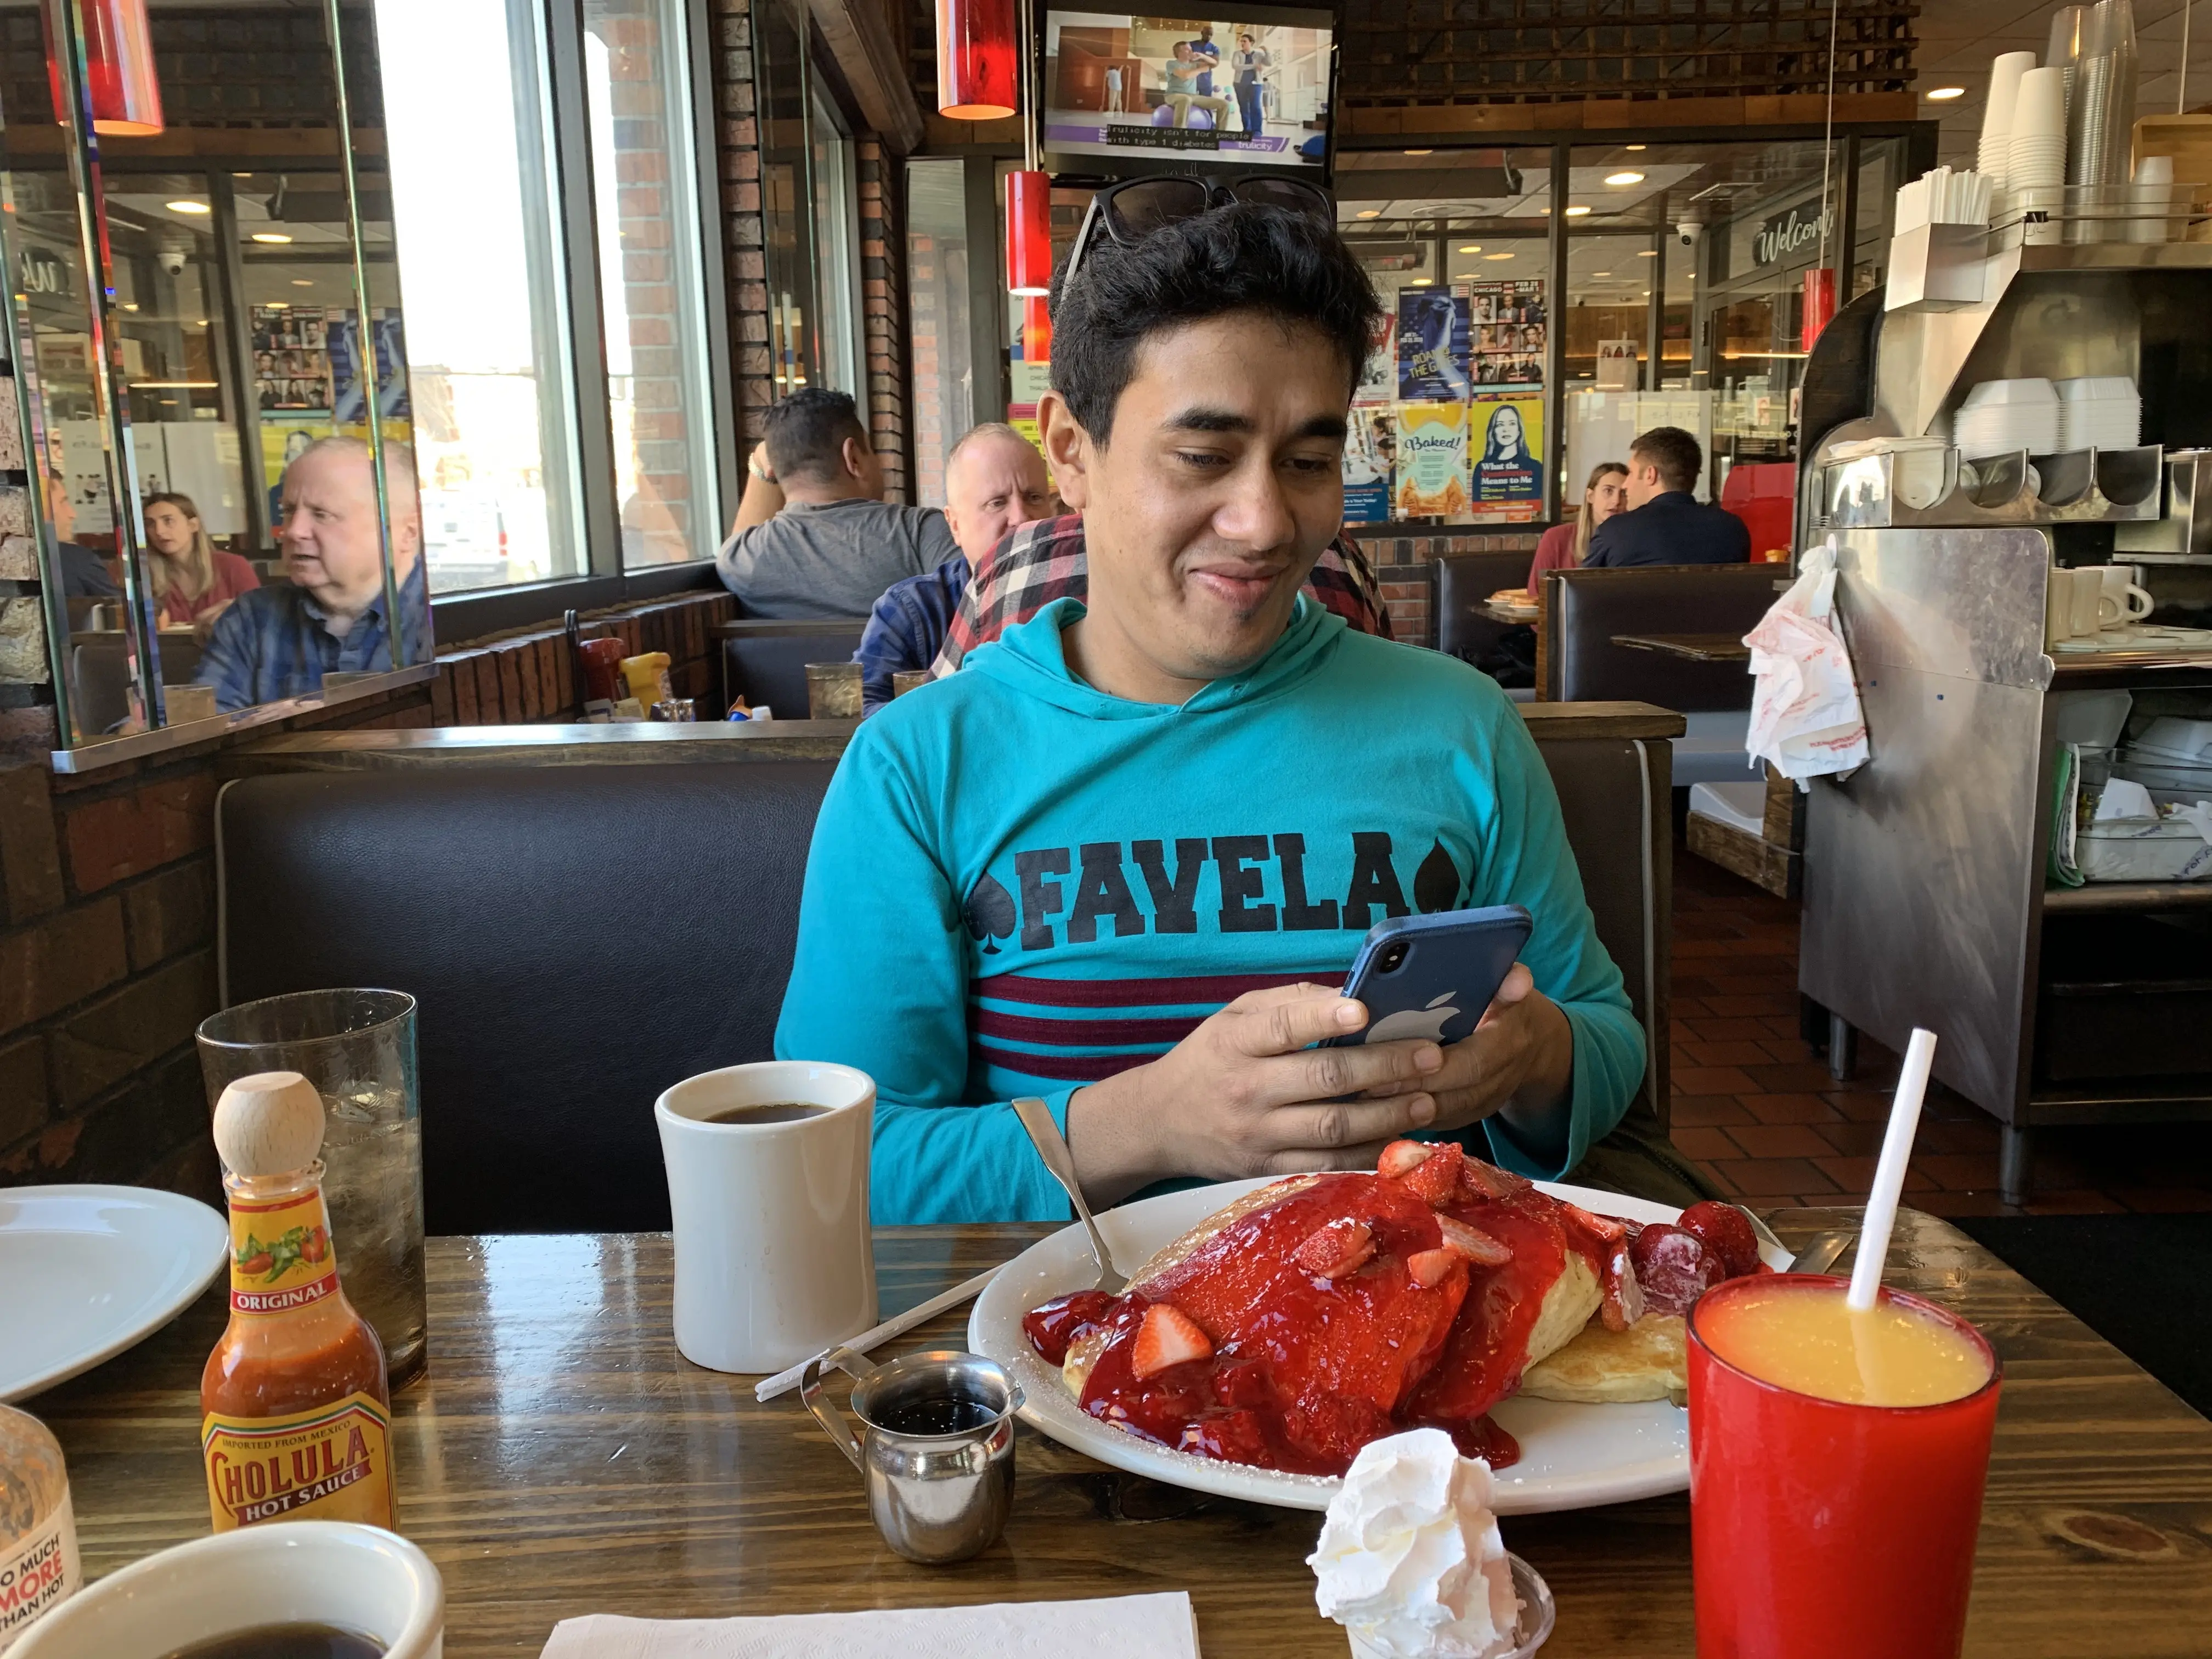 Man takes photo of breakfast at a diner in Chicago